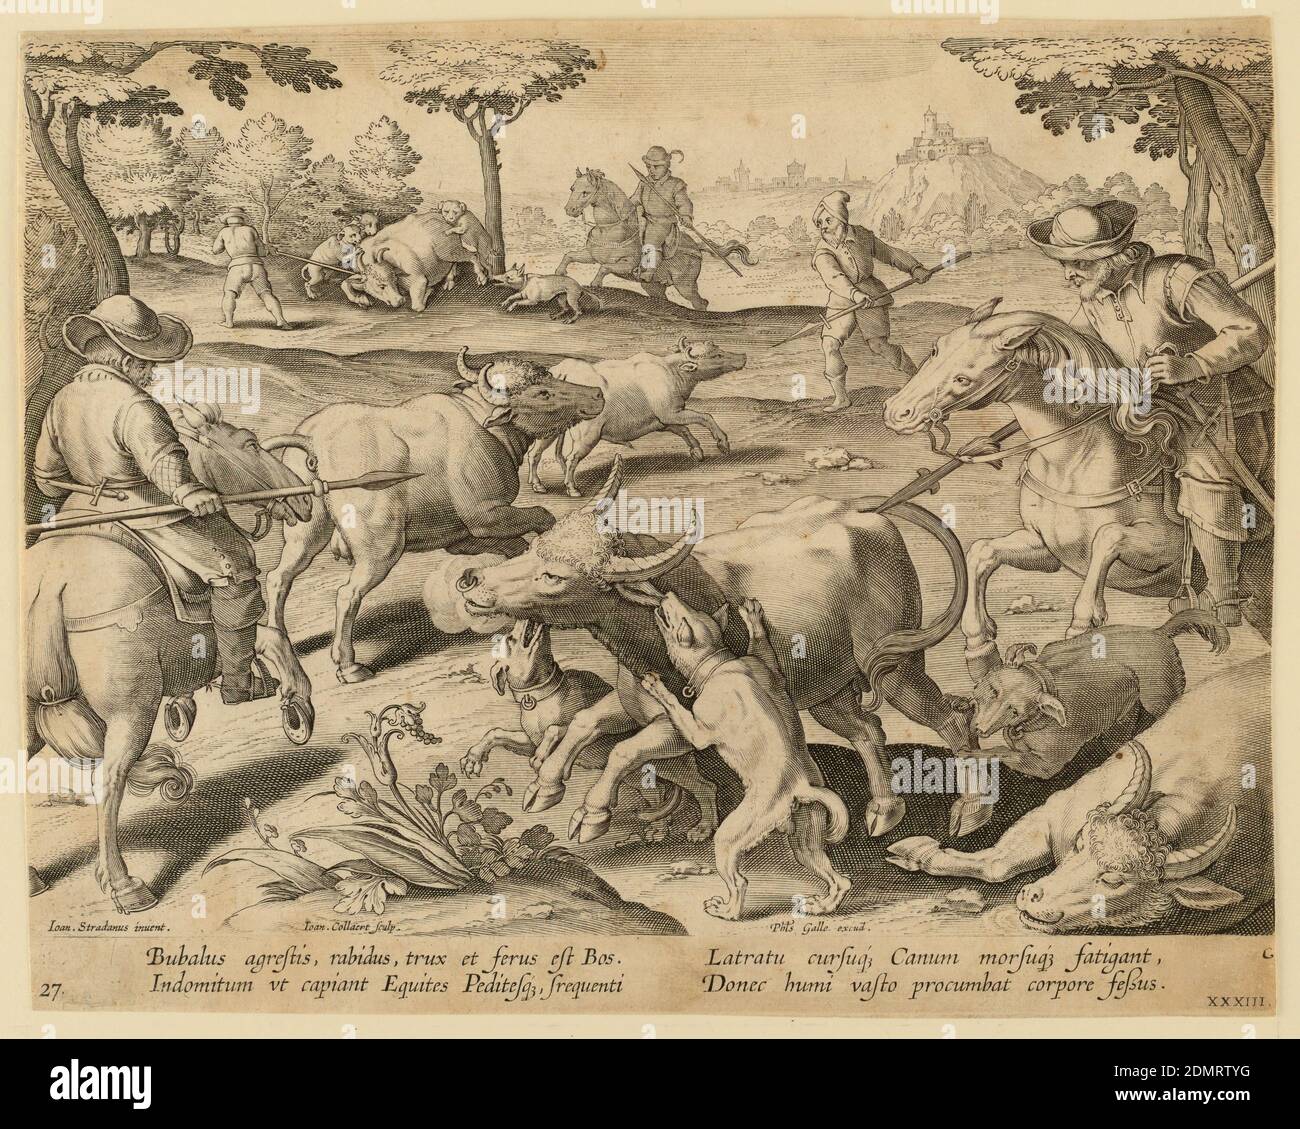 Buffalo Hunt, plate 27 in the Venationes Ferarum, Avium, Piscium series, Jan van der Straet, called Stradanus, Flemish, 1523–1605, Jan Collaert II, Flemish, 1560 - 1628, Philips Galle, Flemish, 1537 - 1612, Engraving on paper, Horizontal rectangle. Hunters on horseback and on foot, armed with spears, have surrounded a group of oxen. The hunters' dogs attack one animal, foreground. At lower left: 'Ioan Stradanus invent. Ioan. Collaert Sculp.' At right: 'Phls. Galle excud.' Below: 'BUBALUS AGRESTIS, RABIDUS, TRUX ET FERUS EST BOS...', Netherlands, 1596, figures, Print Stock Photo